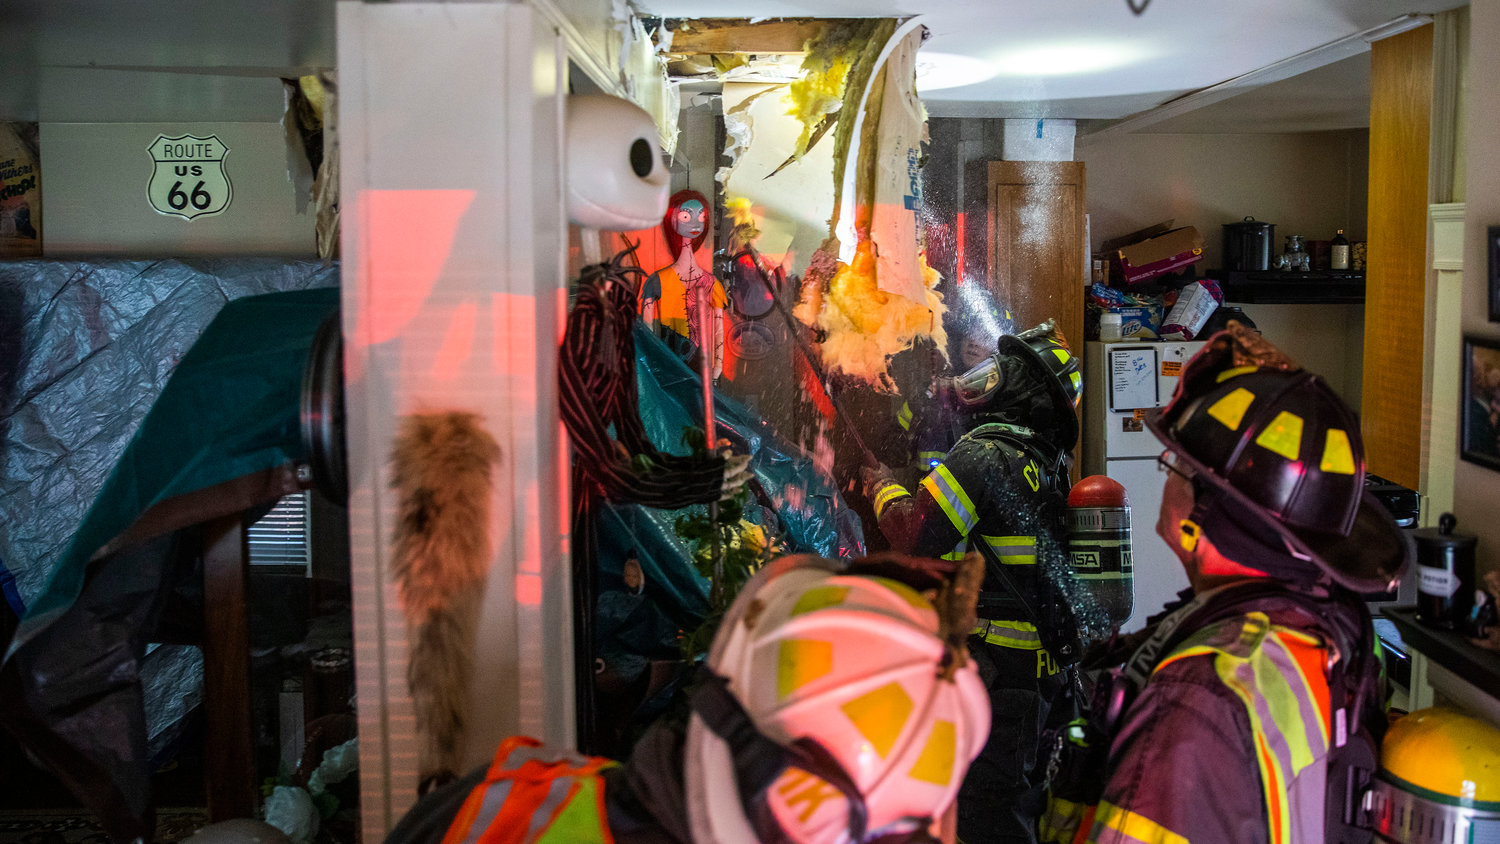 Riverside firefighters work to locate hot spots while tearing apart sections of flooring and ceiling inside a building following a residential fire in the 200 block of North Rock Street in Centralia on Friday.